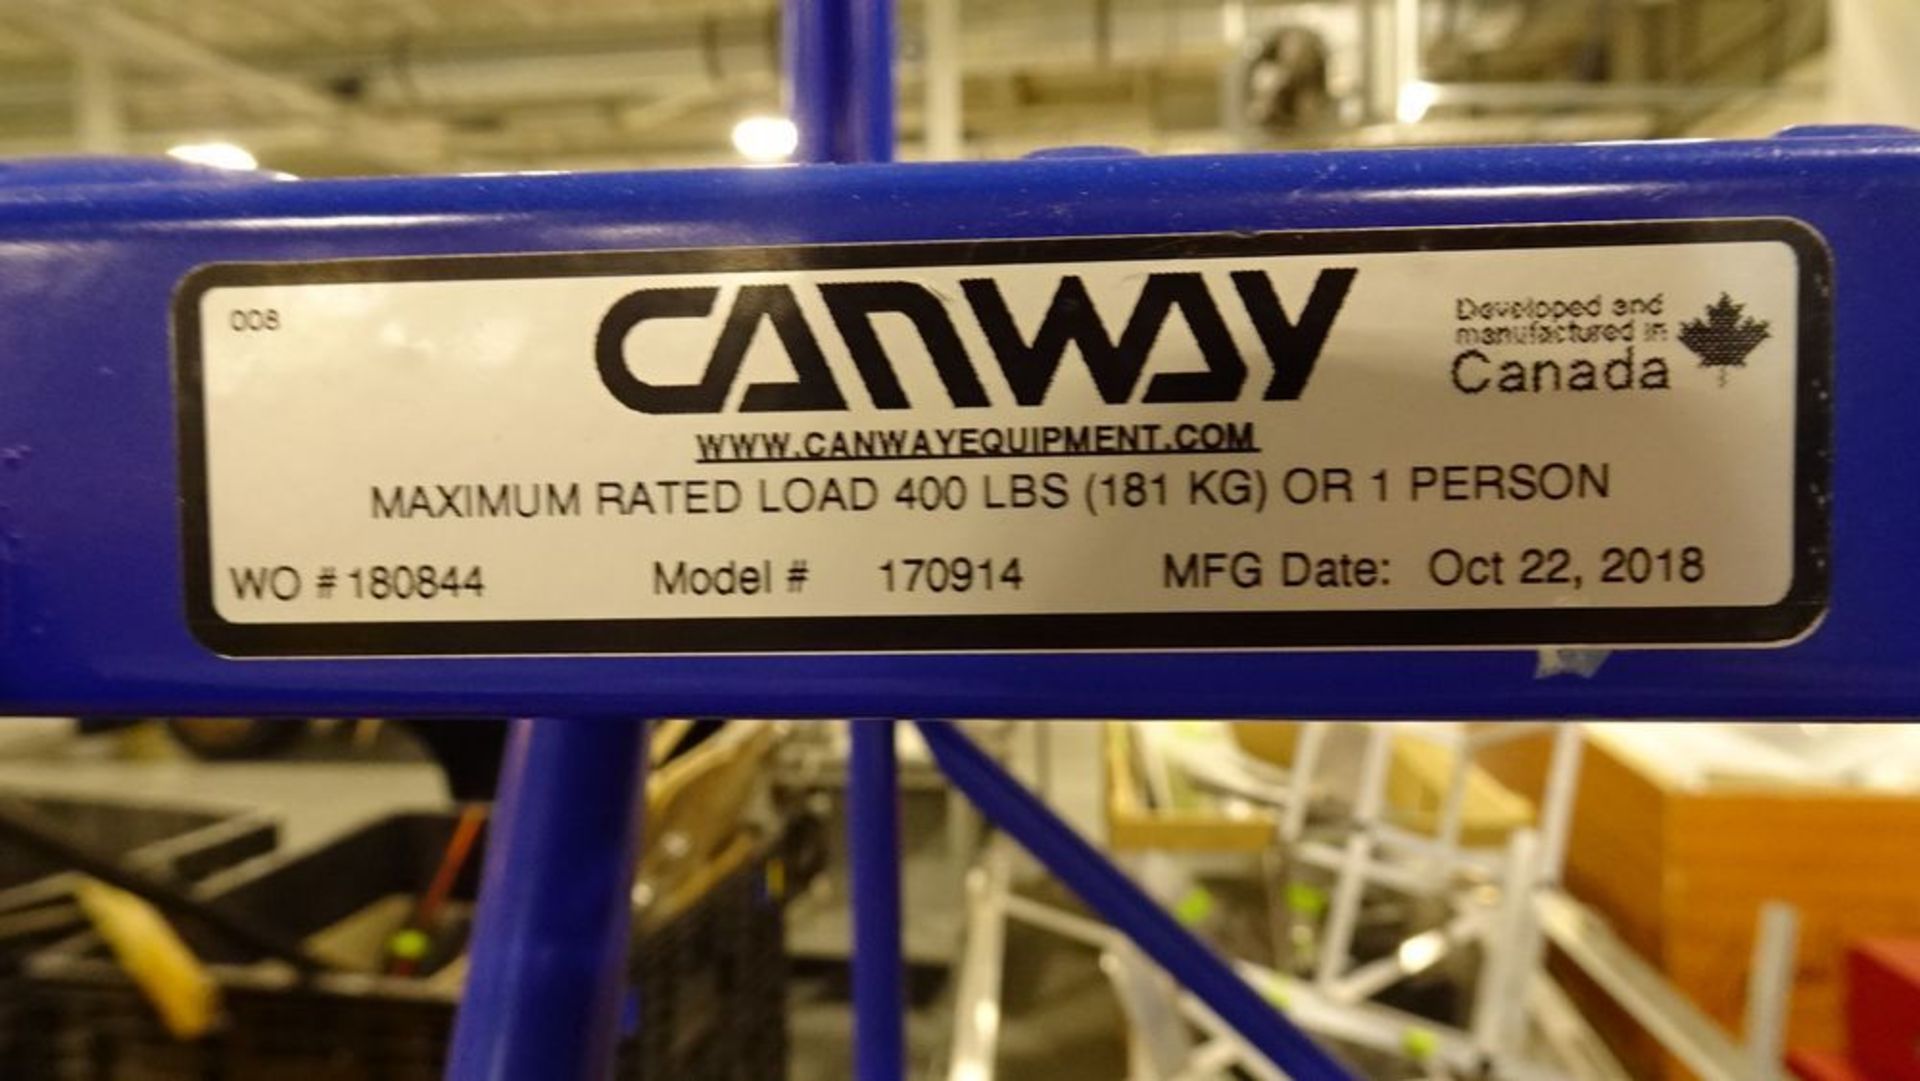 2018 CANWAY 170914 PORTABLE WAREHOUSE LADDER (REUTER) - Image 2 of 2